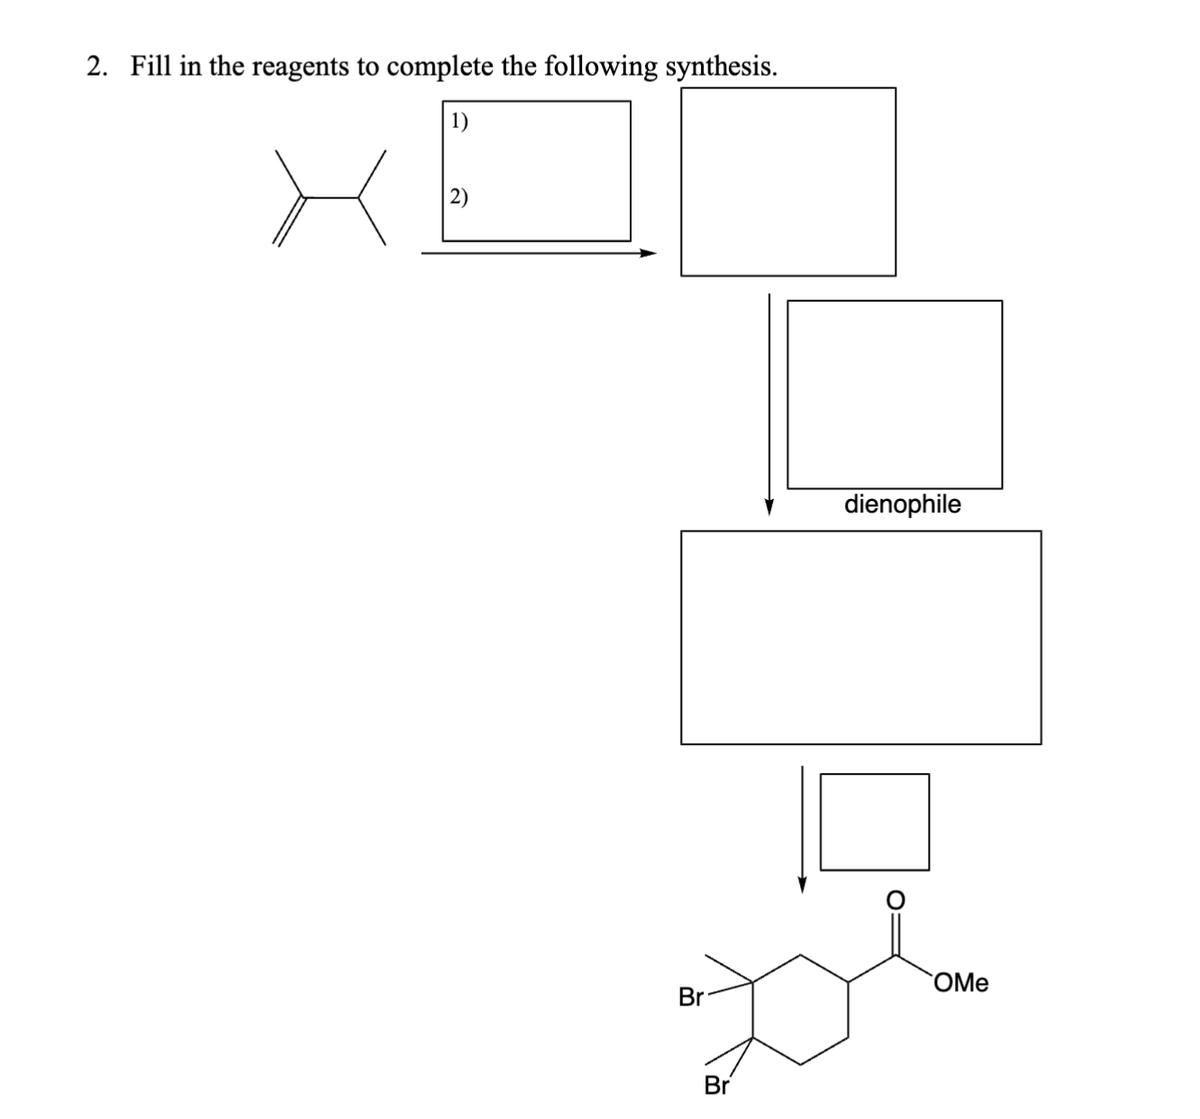 2. Fill in the reagents to complete the following synthesis.
1)
2)
dienophile
Br
Br
5
OMe